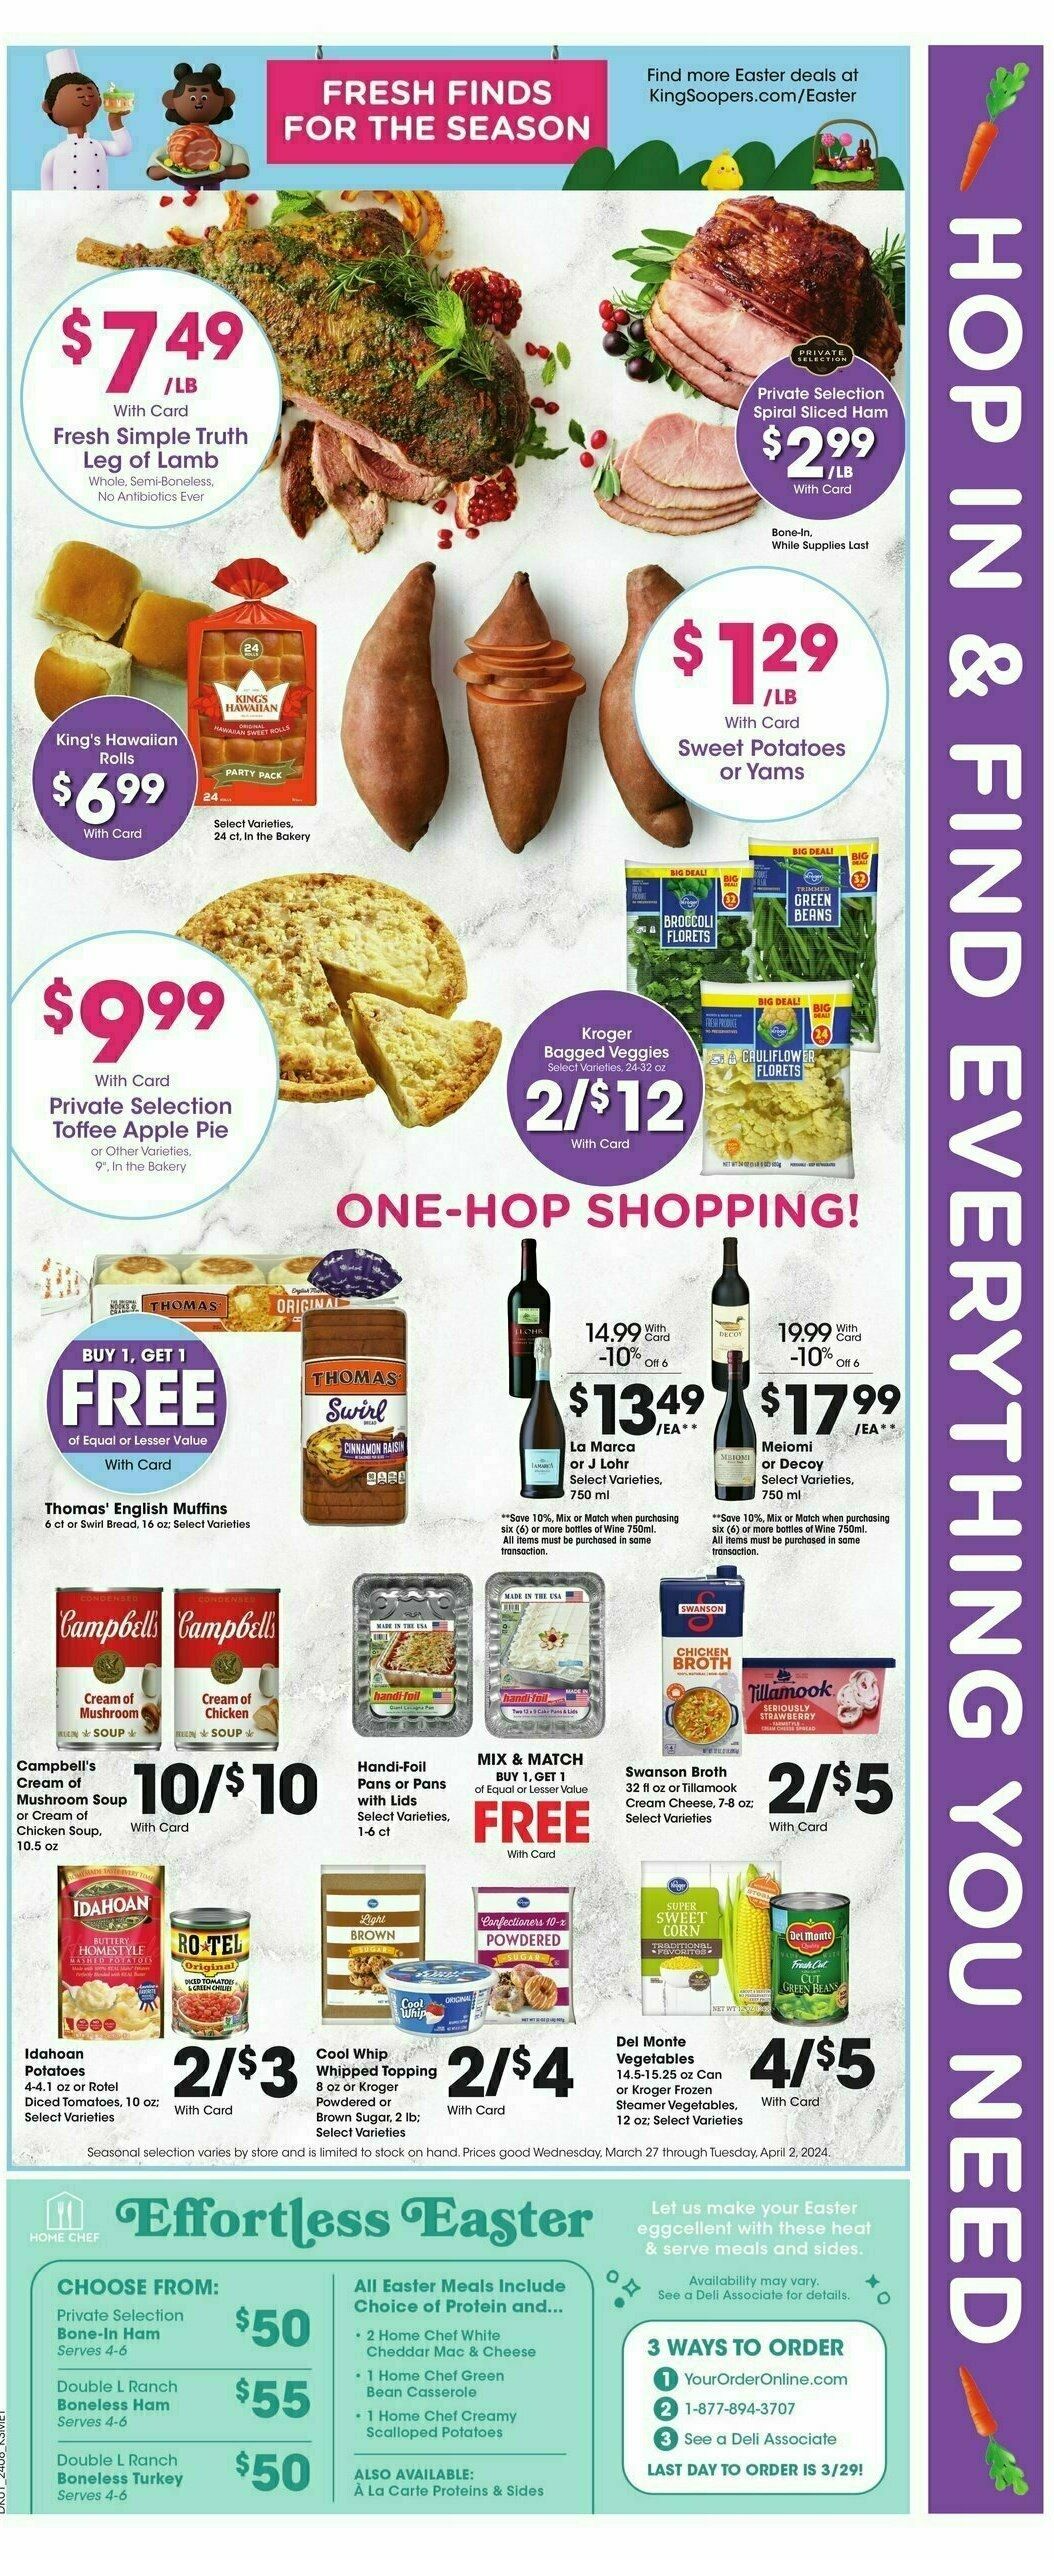 King Soopers Weekly Ad from March 27